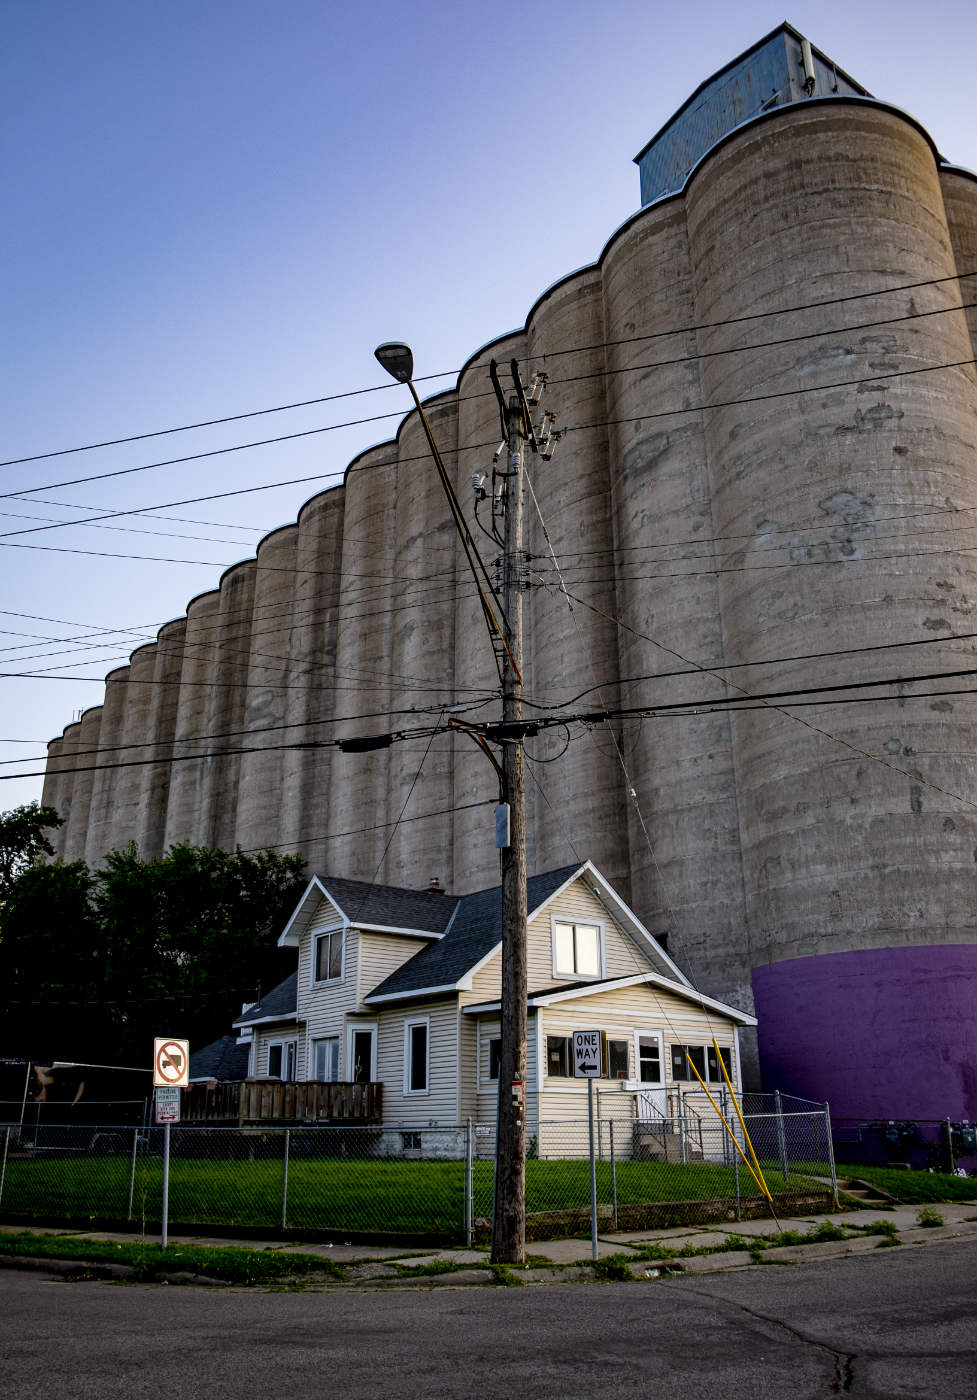 Tall gray grain elevators receding against a blue sky towering over a bungalow house in front